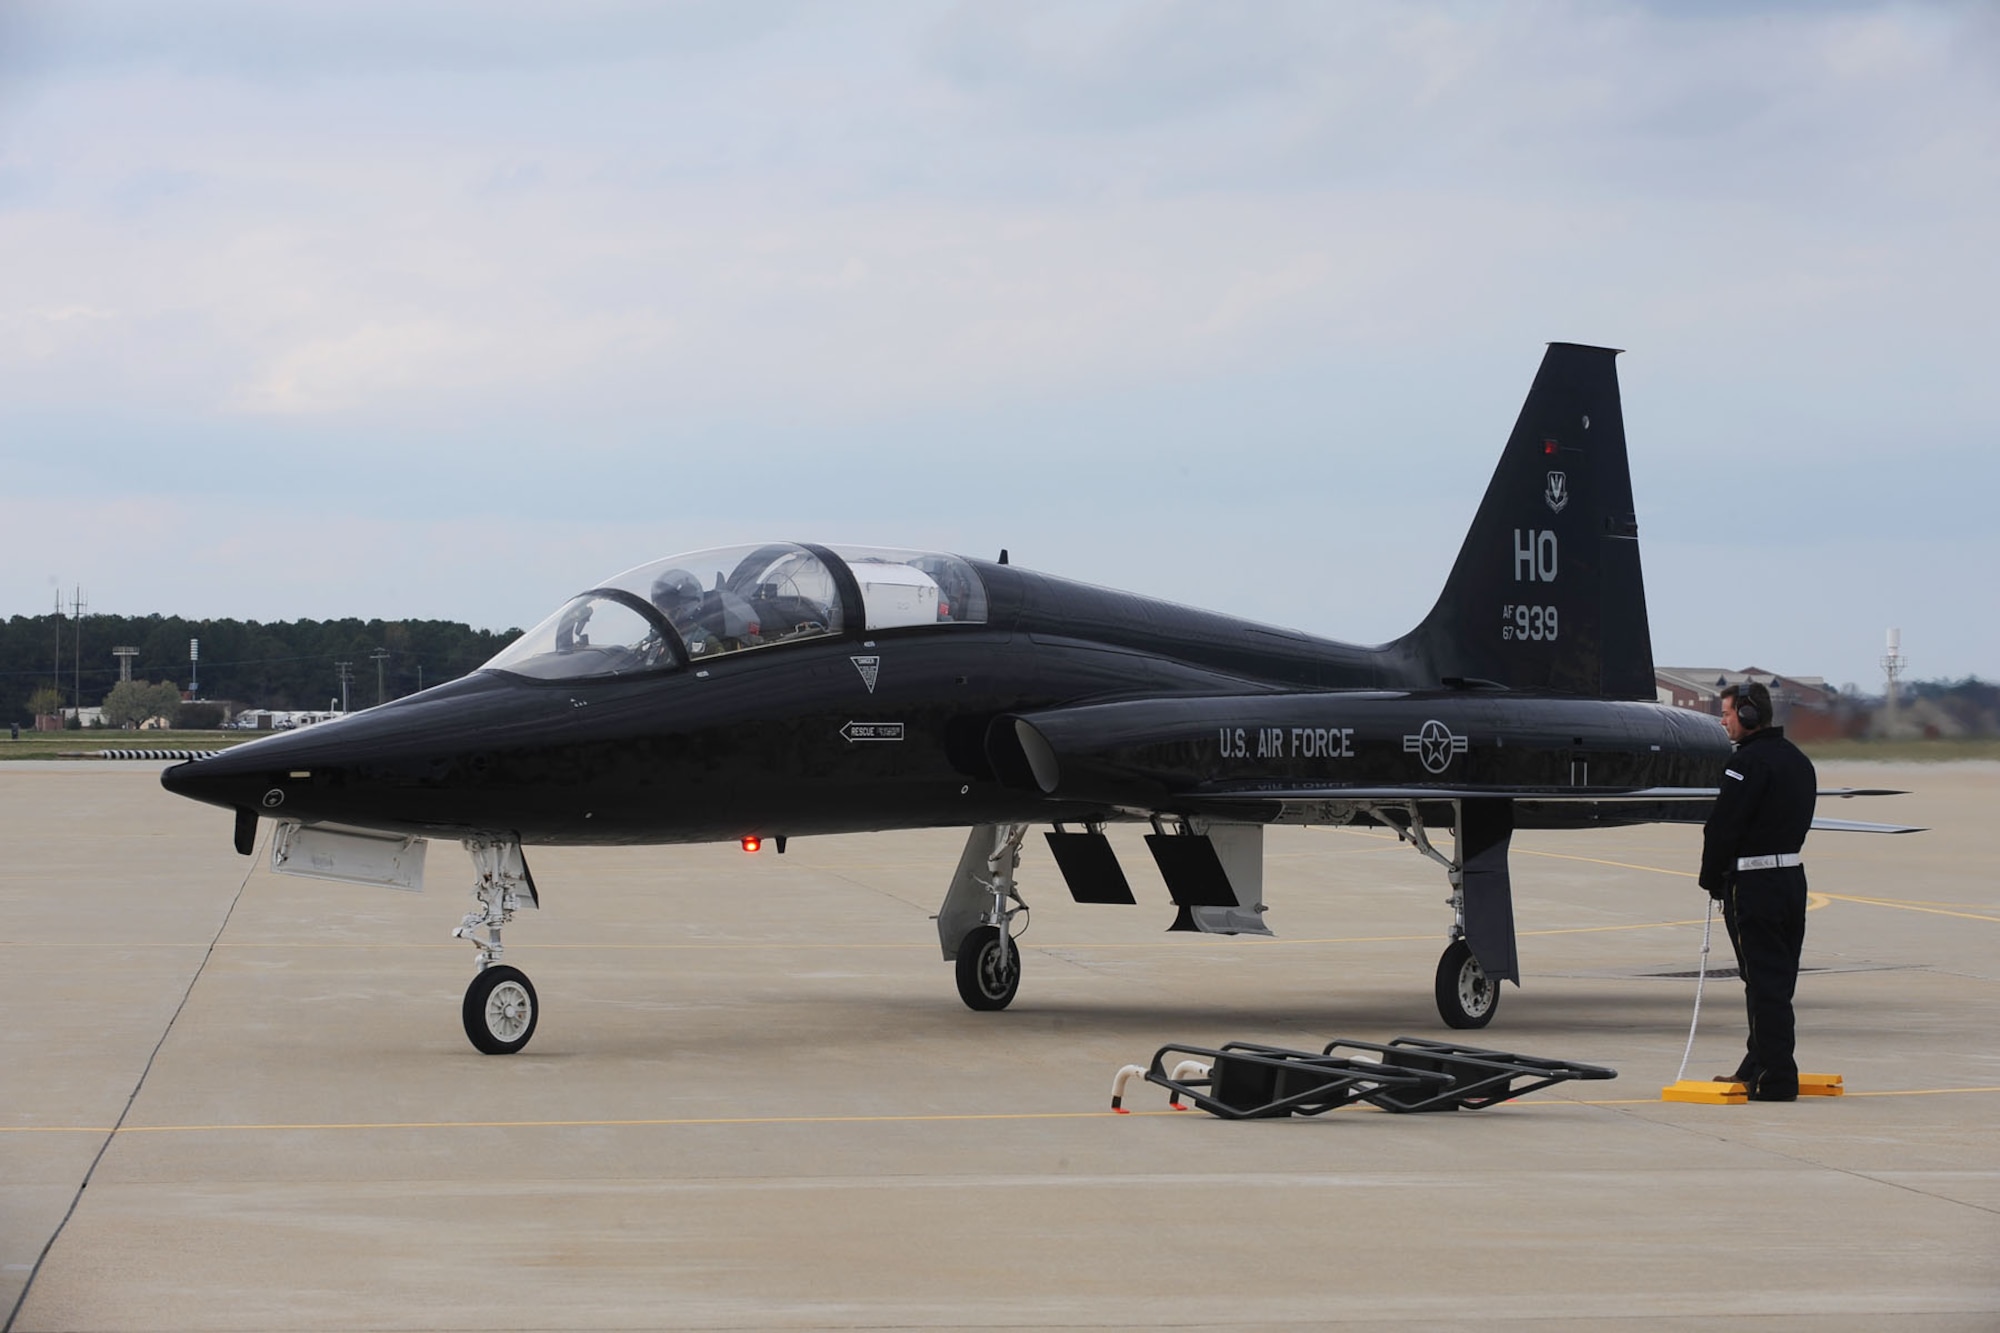 Col. Kevin Mastin, 1st Fighter Wing vice commander arrives at Langley AFB, Va., April 1, 2011 in a T-38 Talon. The T-38, from Holloman AFB, N.M., is on a temporary duty assignment to support the F-22 Raptors and provide hands-on combat readiness training for 1st FW pilots. (U.S. Air Force photo by Staff Sgt. Ashley Hawkins/Released)